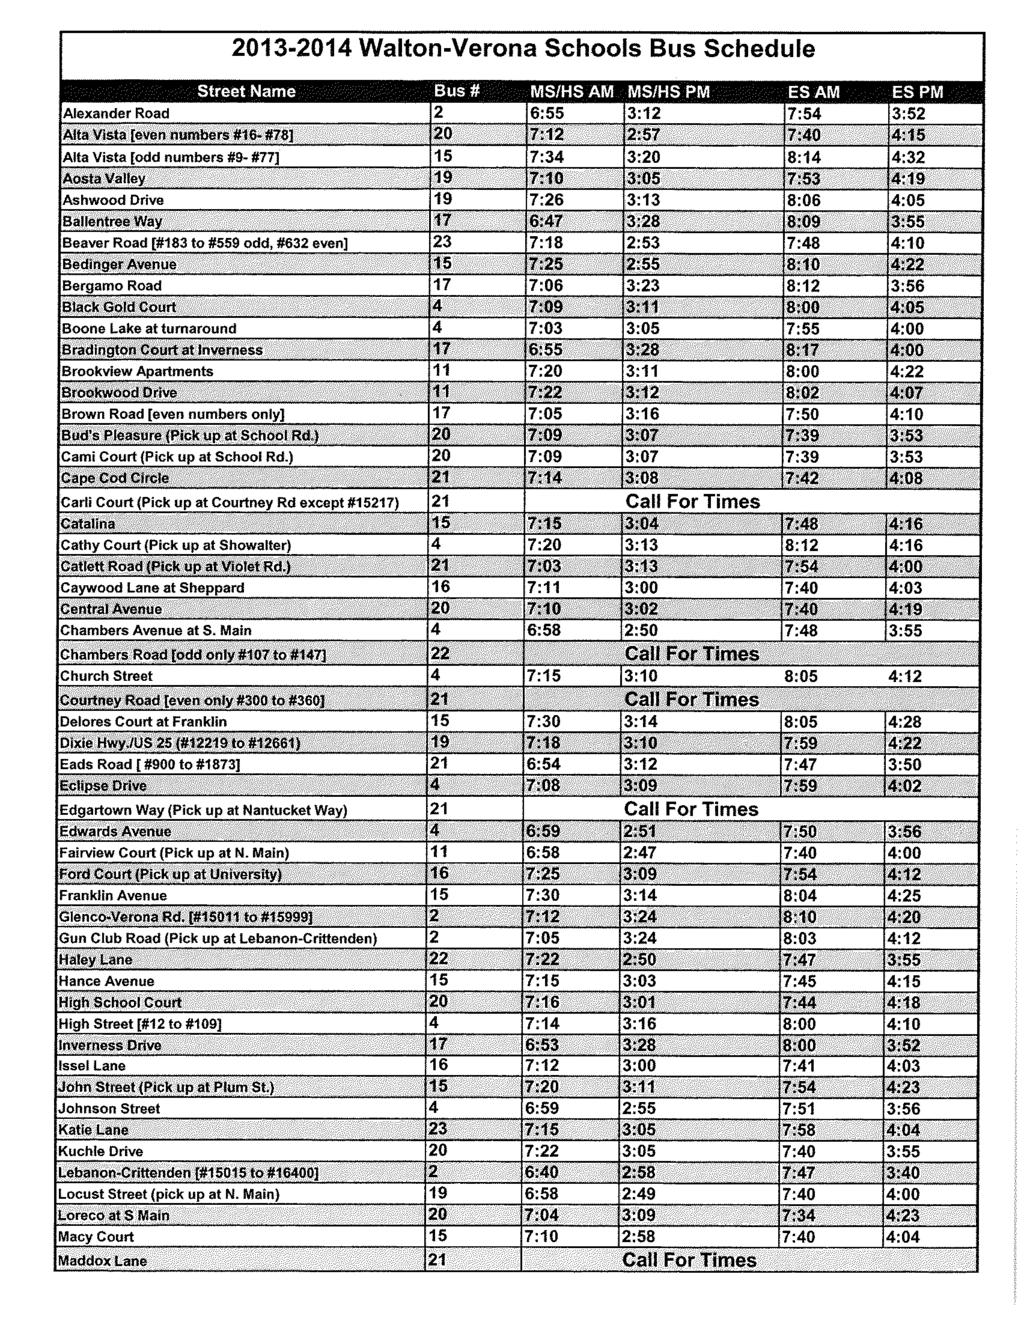 Page 10 The Walton-Verona Mirror Bus Schedule The following information is important to your child s daily transportation. Please be sure to review this with your child. Welcome back to school!